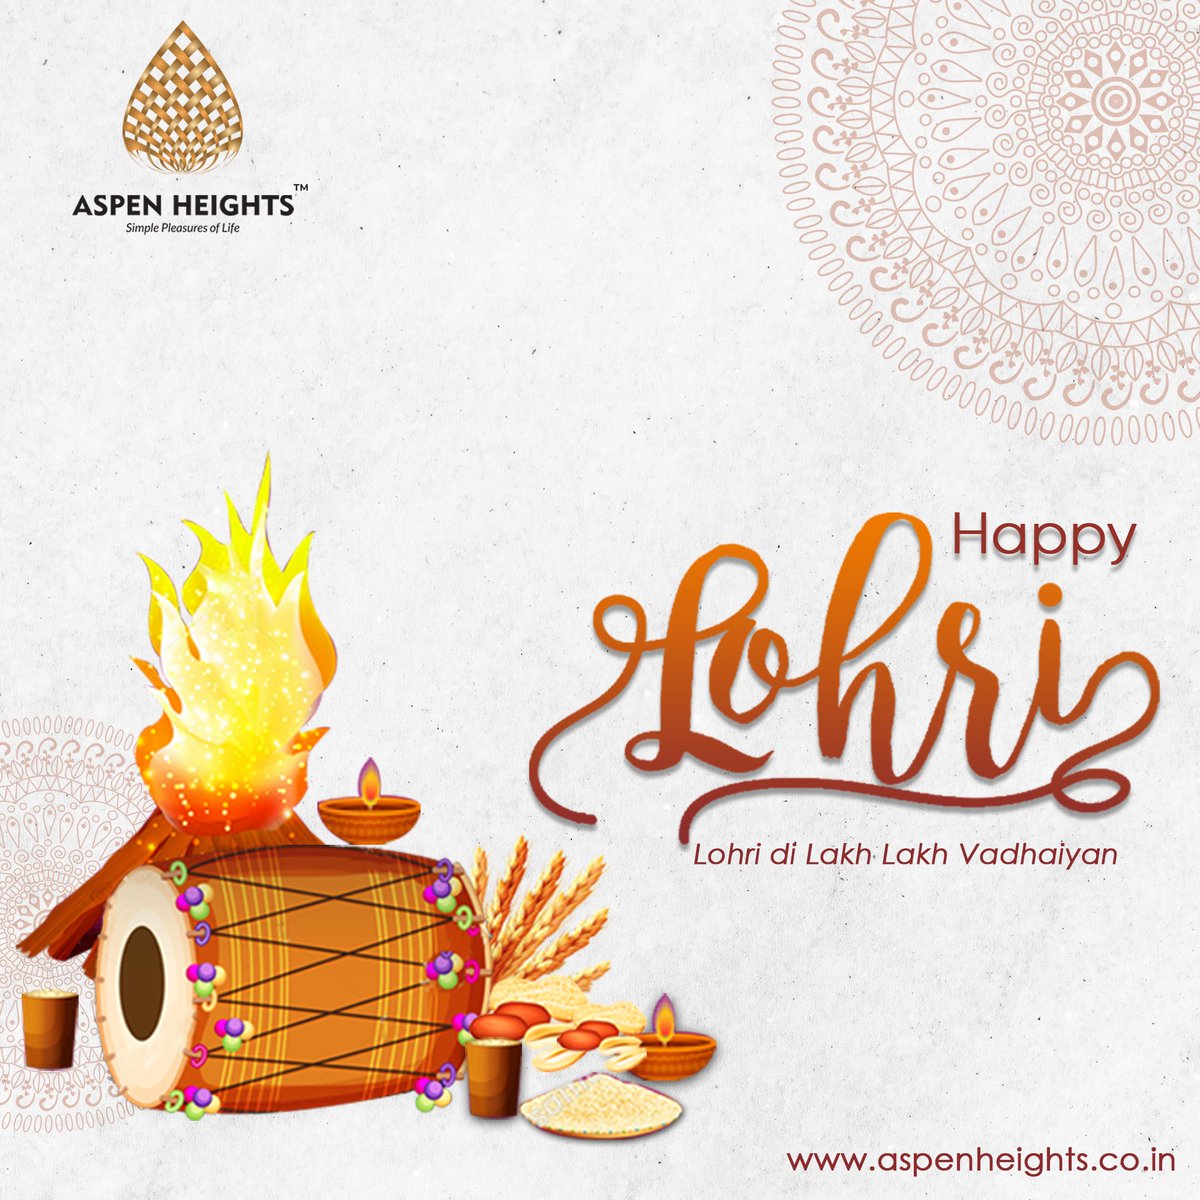 Warmest greetings to you and your family on the festive occasion of Lohri. Let us pray for happiness, success, and brightness in life. Happy Lohri from Team Aspen Heights.
.
.
.
.
.
.
.
.
#aspenheights #happylohri #lohri #lohri2023 #wishes #prosperity #pray #happiness #success